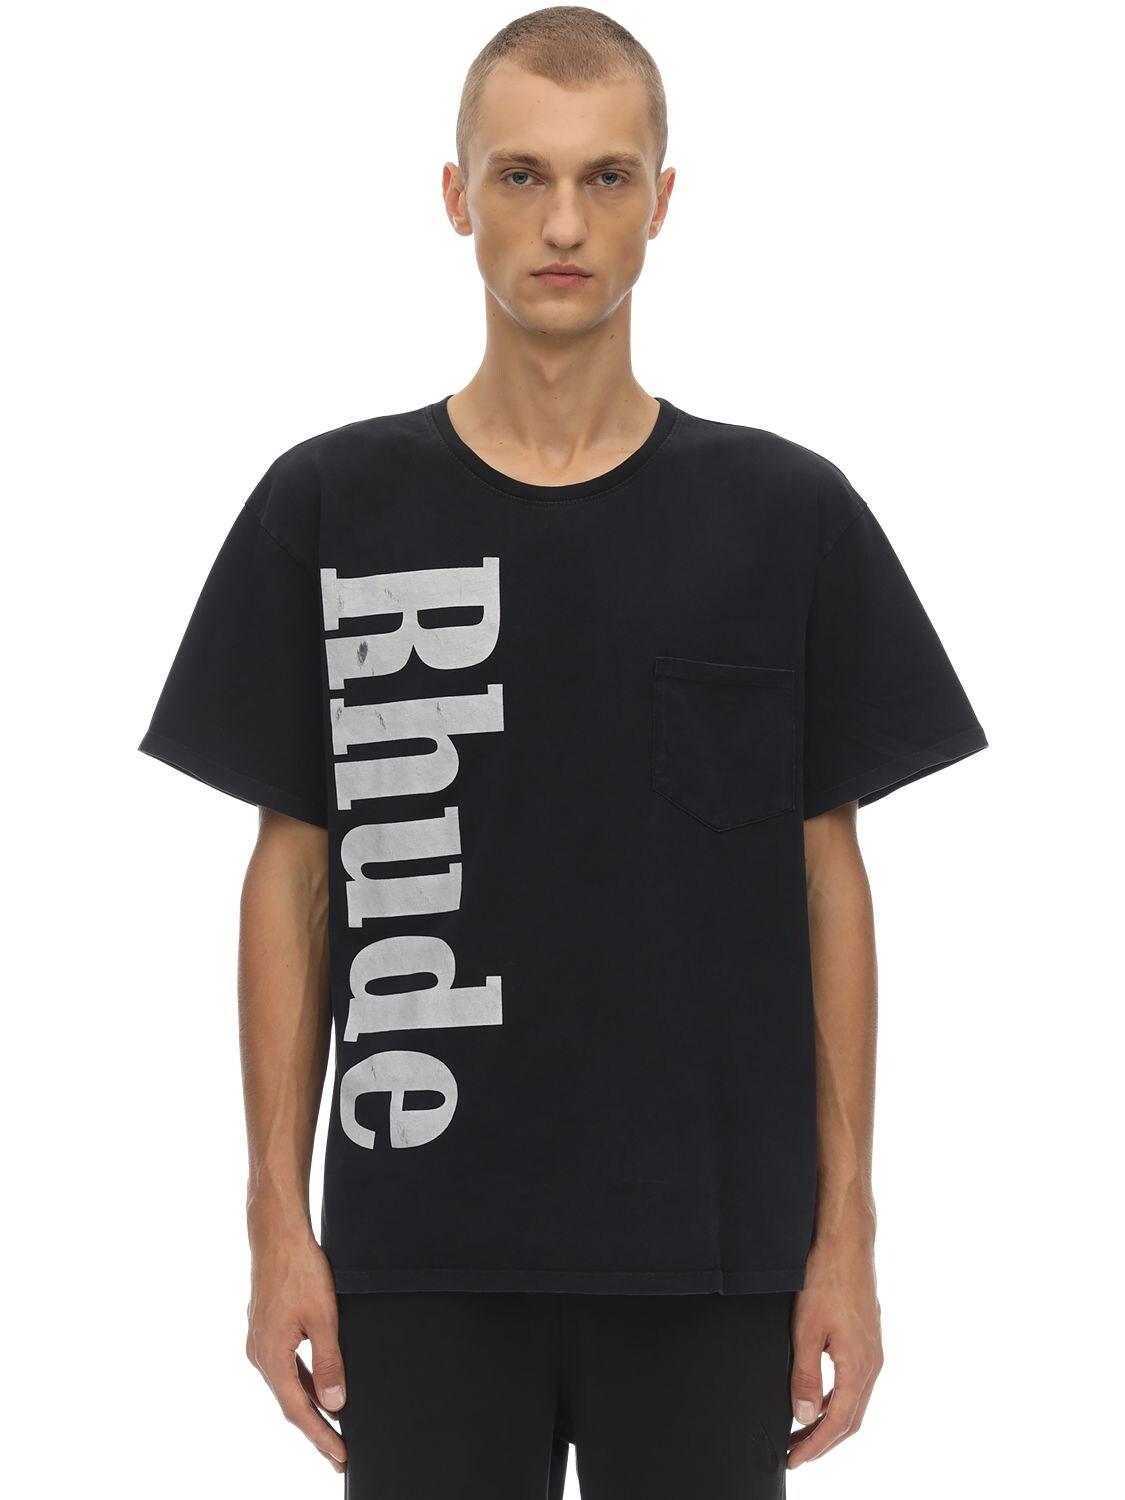 Rhude Printed Cotton Jersey T-shirt in Black for Men - Lyst